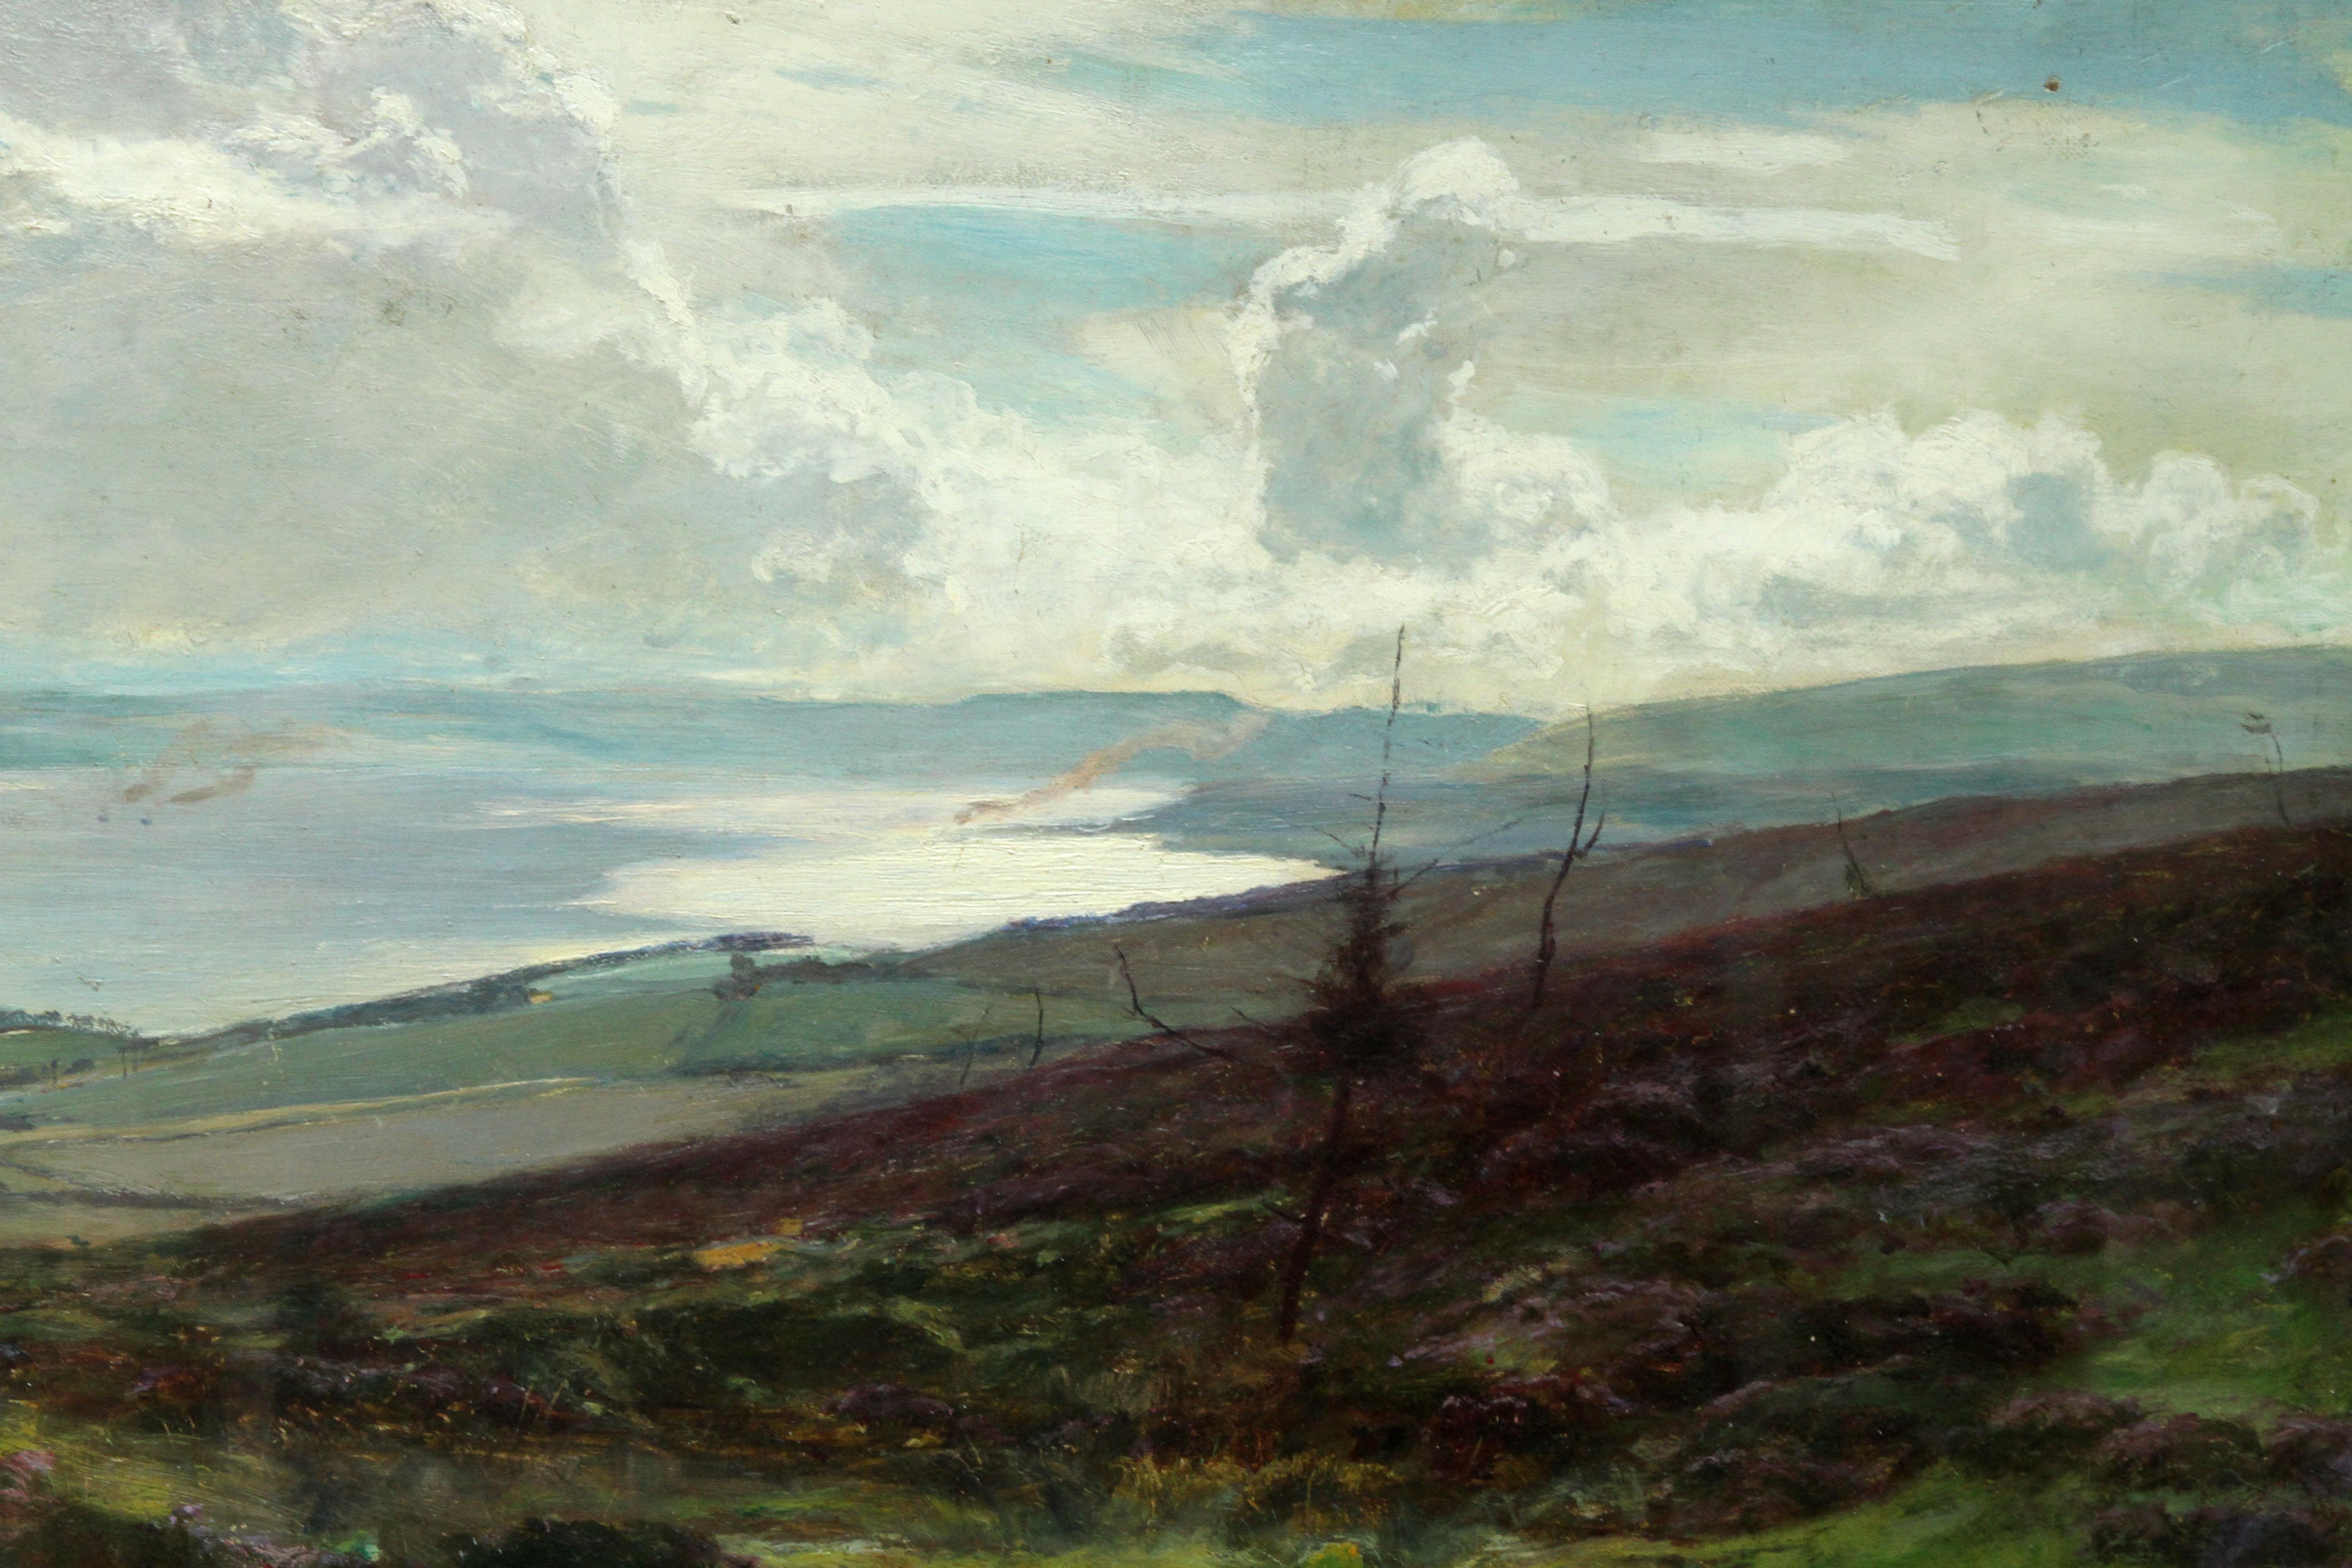 This stunning exhibited Victorian panoramic Scottish landscape is by noted Scottish artist Sir David Murray. It was painted and exhibited in 1881 at the Royal Scottish Academy No. 514 'The Clyde from Darleith Moor above Cardross'. A man with three